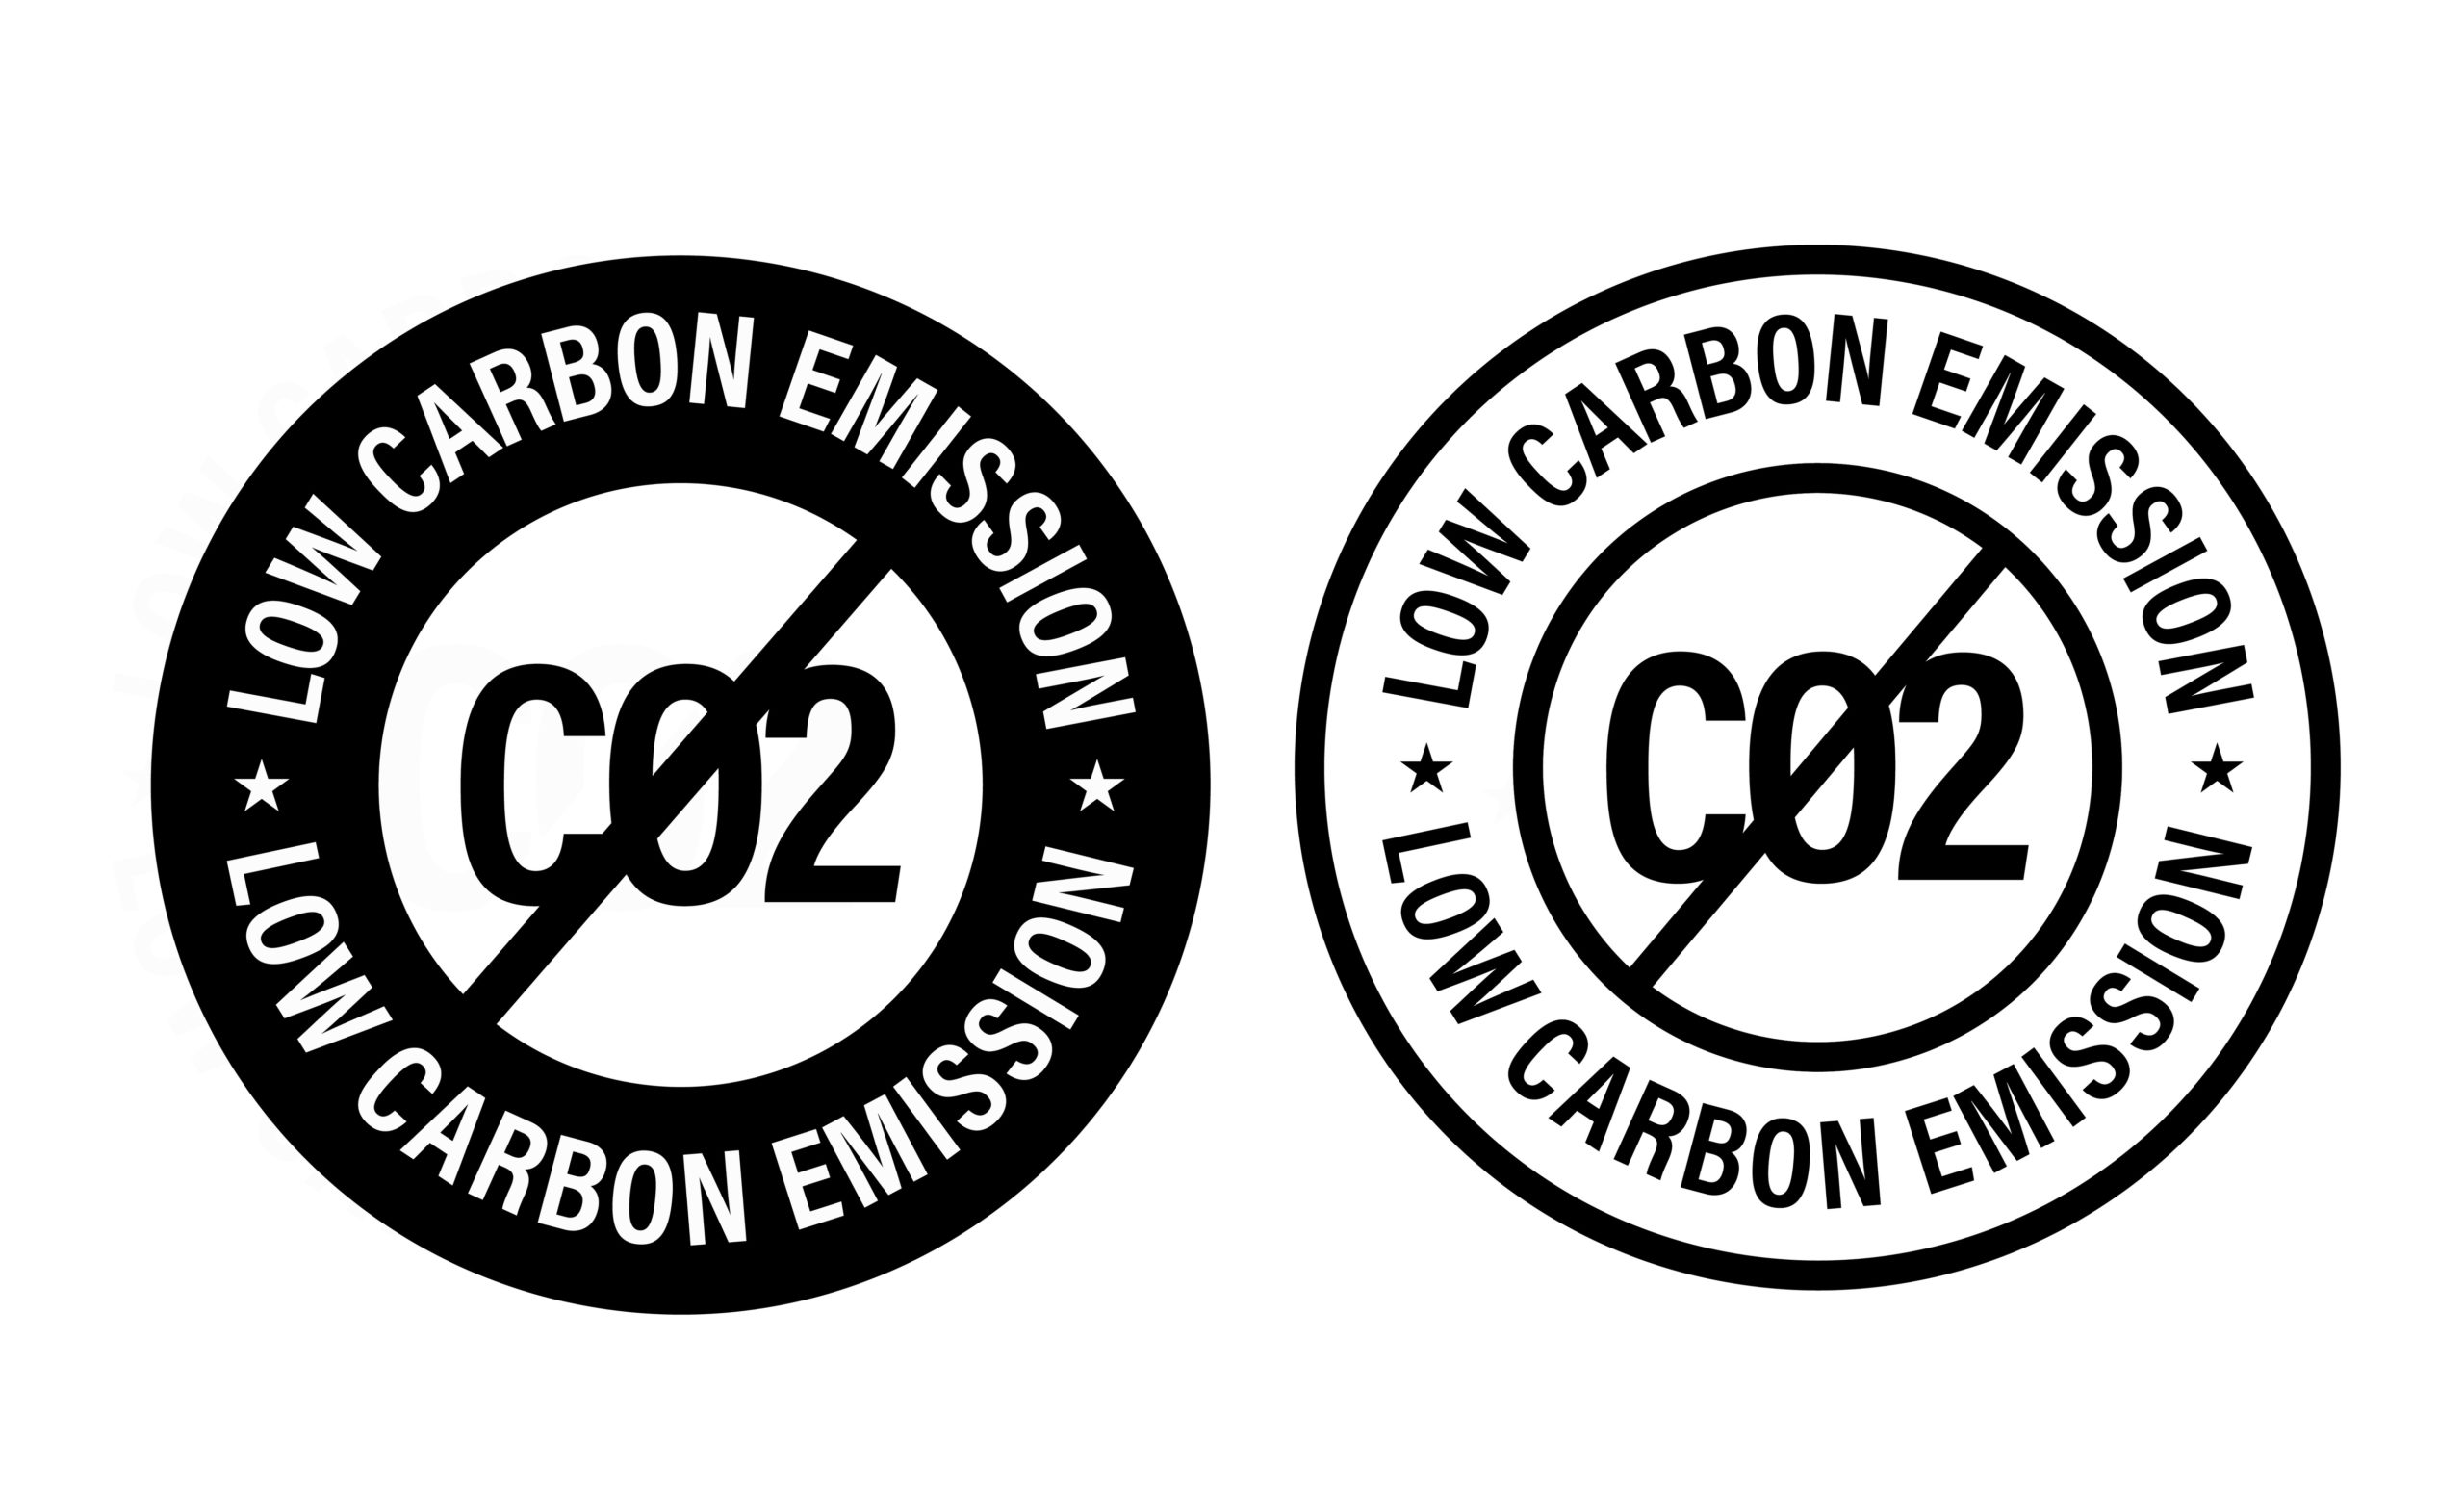 vector image of two circles, one black and one white, both with crossed out C02 text in the middle and low carbon emissions written around the circle